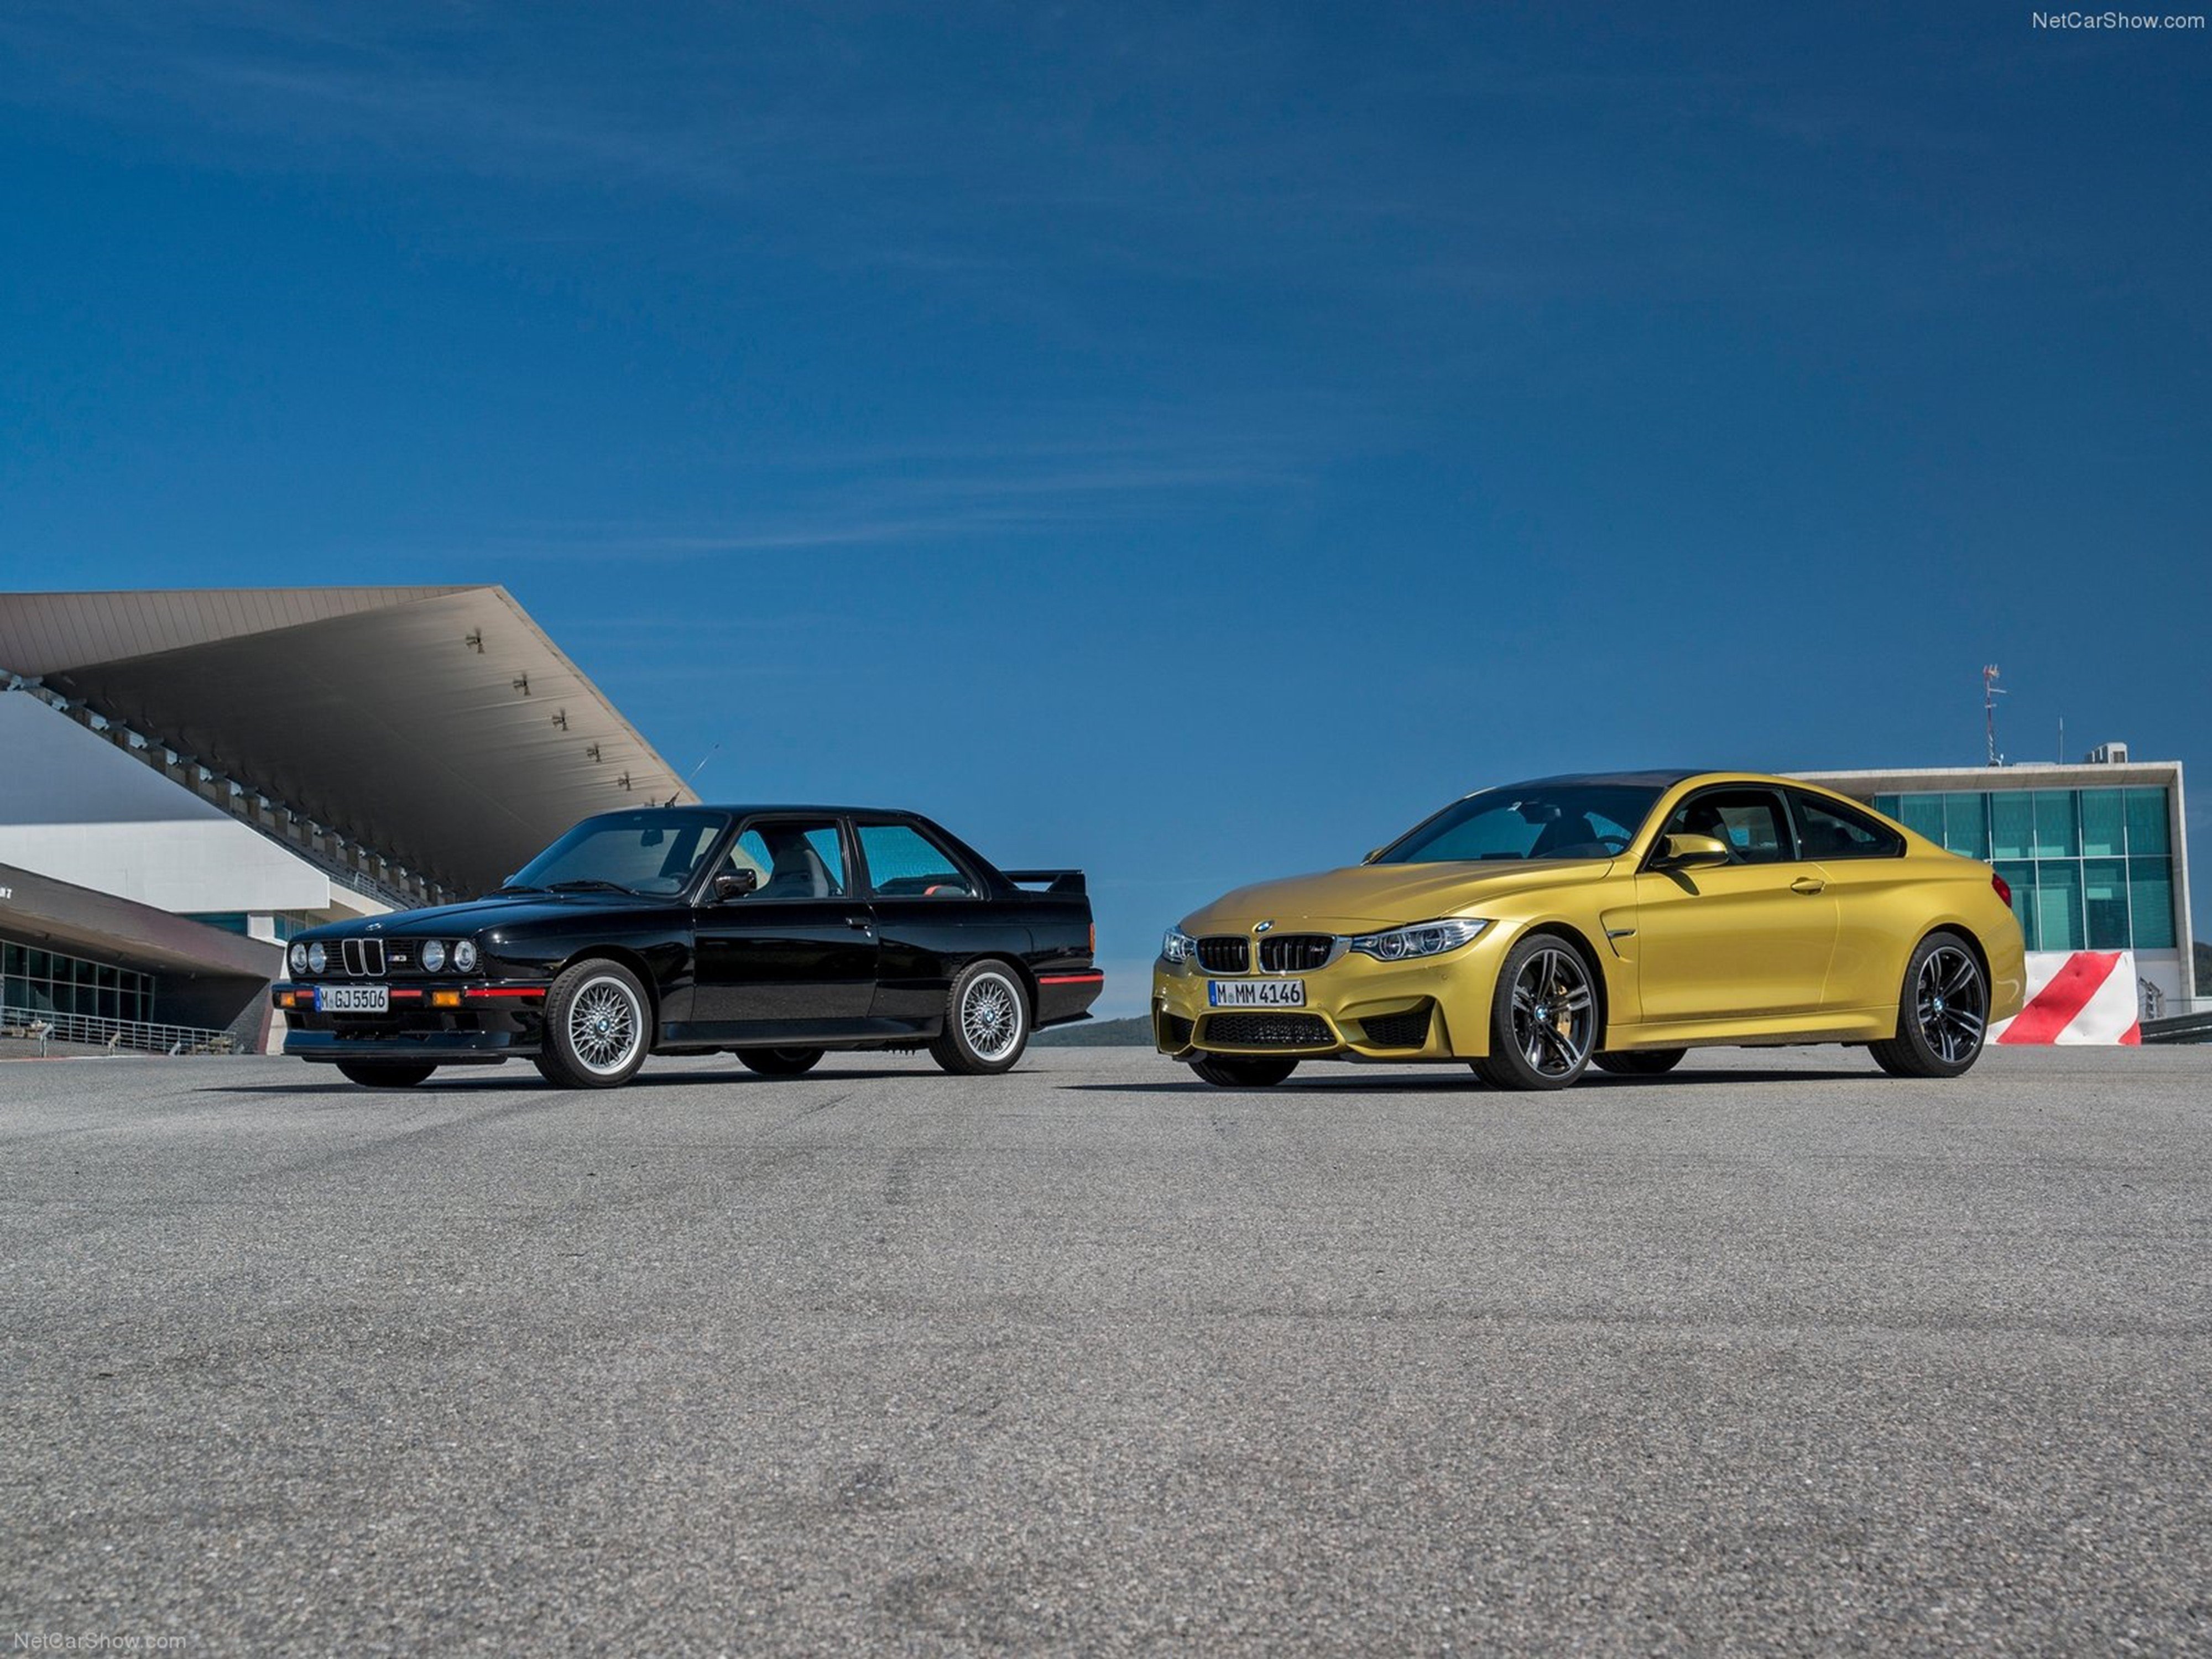 bmw, M4 coupe, 2015, Supercar, Car, Germany, Sport, 4000x3000 Wallpaper